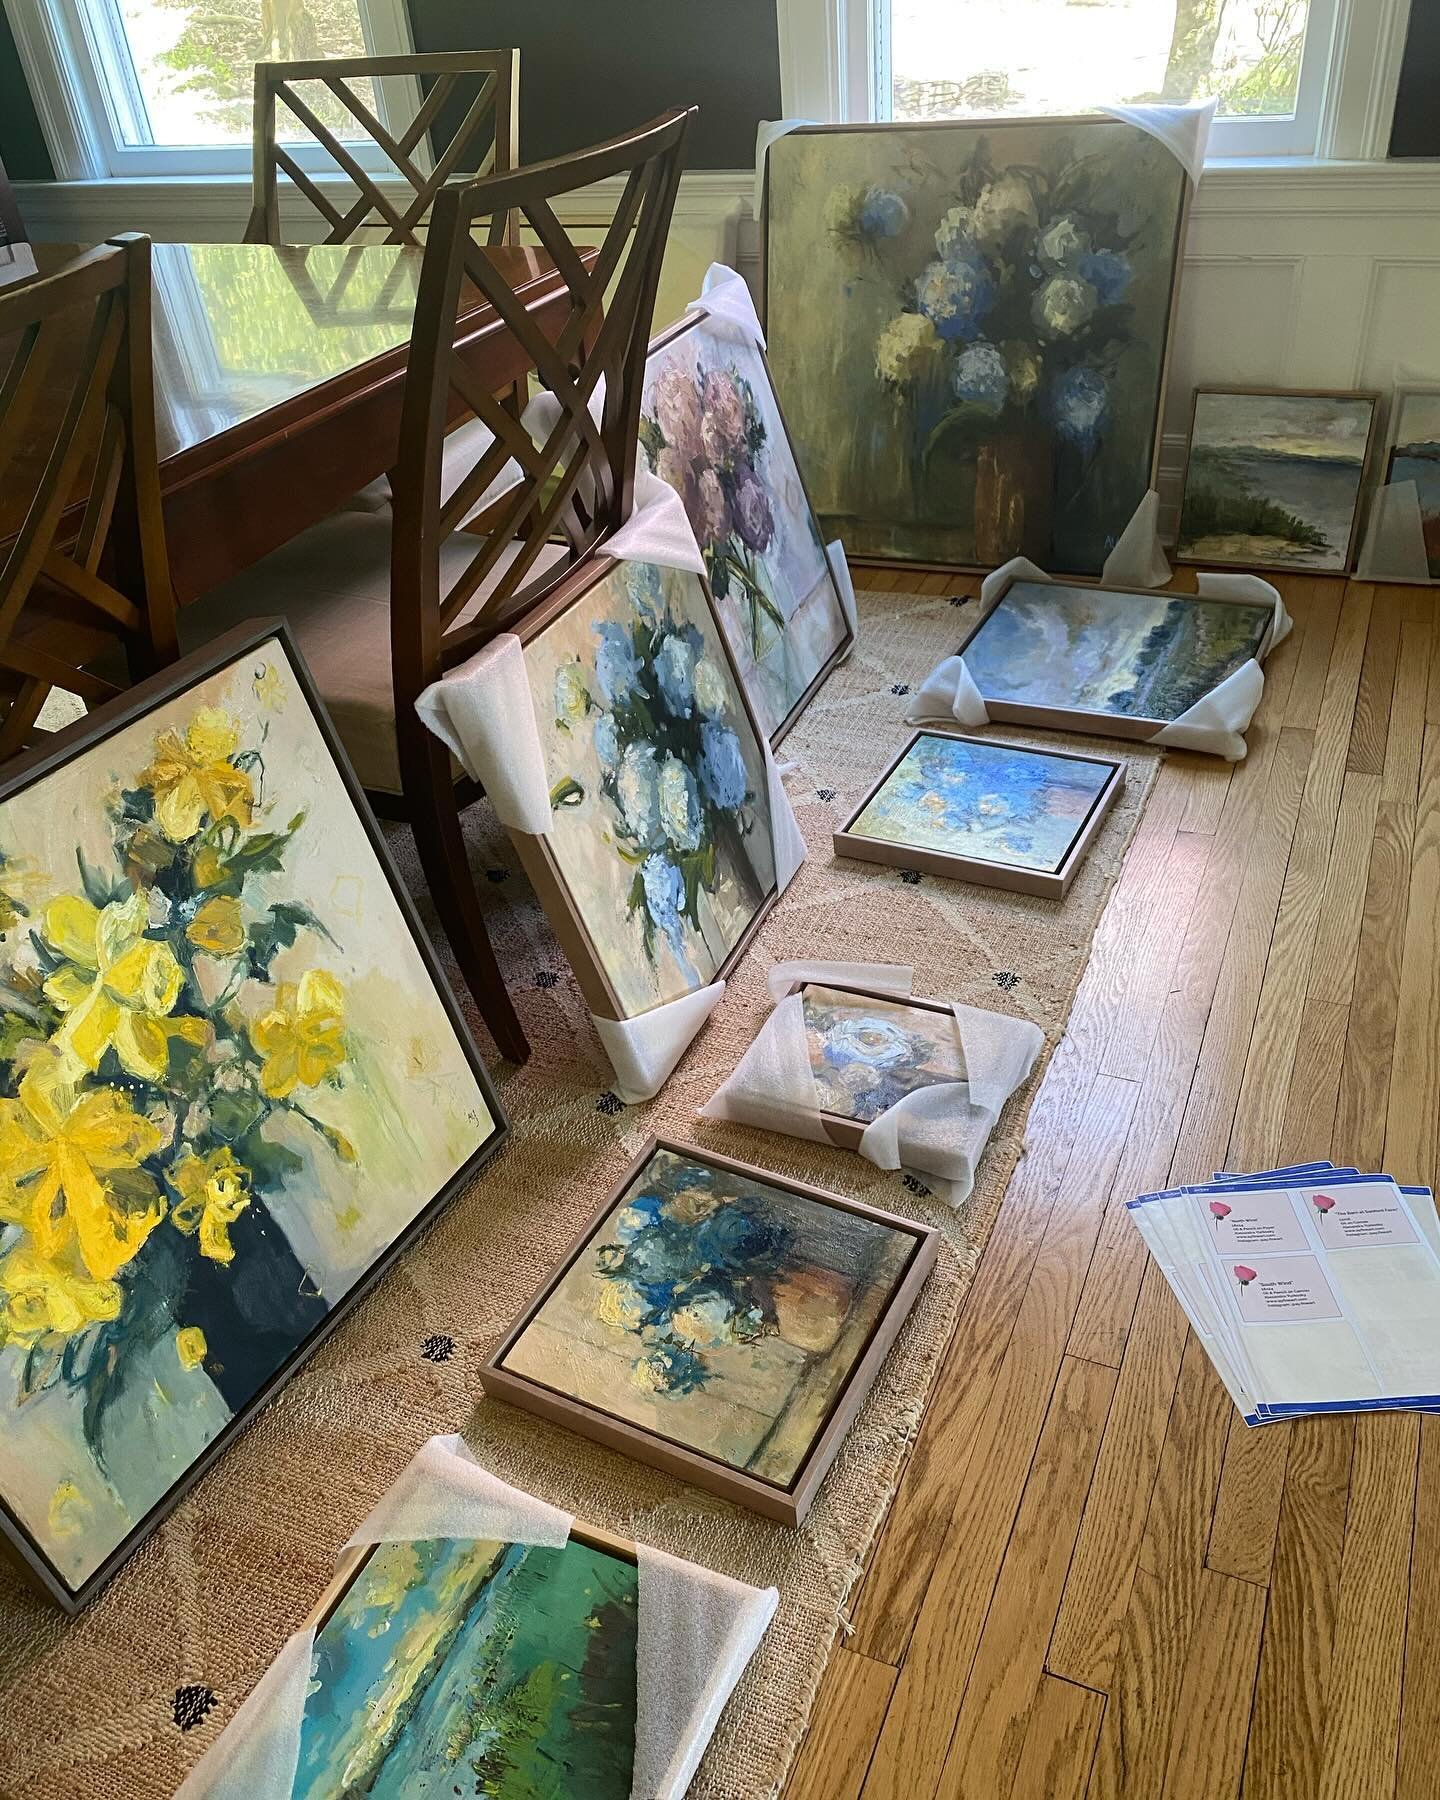 All paperwork and no paint! Spent all morning labeling, photographing, and updating my website. All the un-glamorous jobs!
.
.
#oilpainting #landscapepainting #floralpainting #nantucket #nantucketstyle #nantucketartist #njartist #behindthescenes